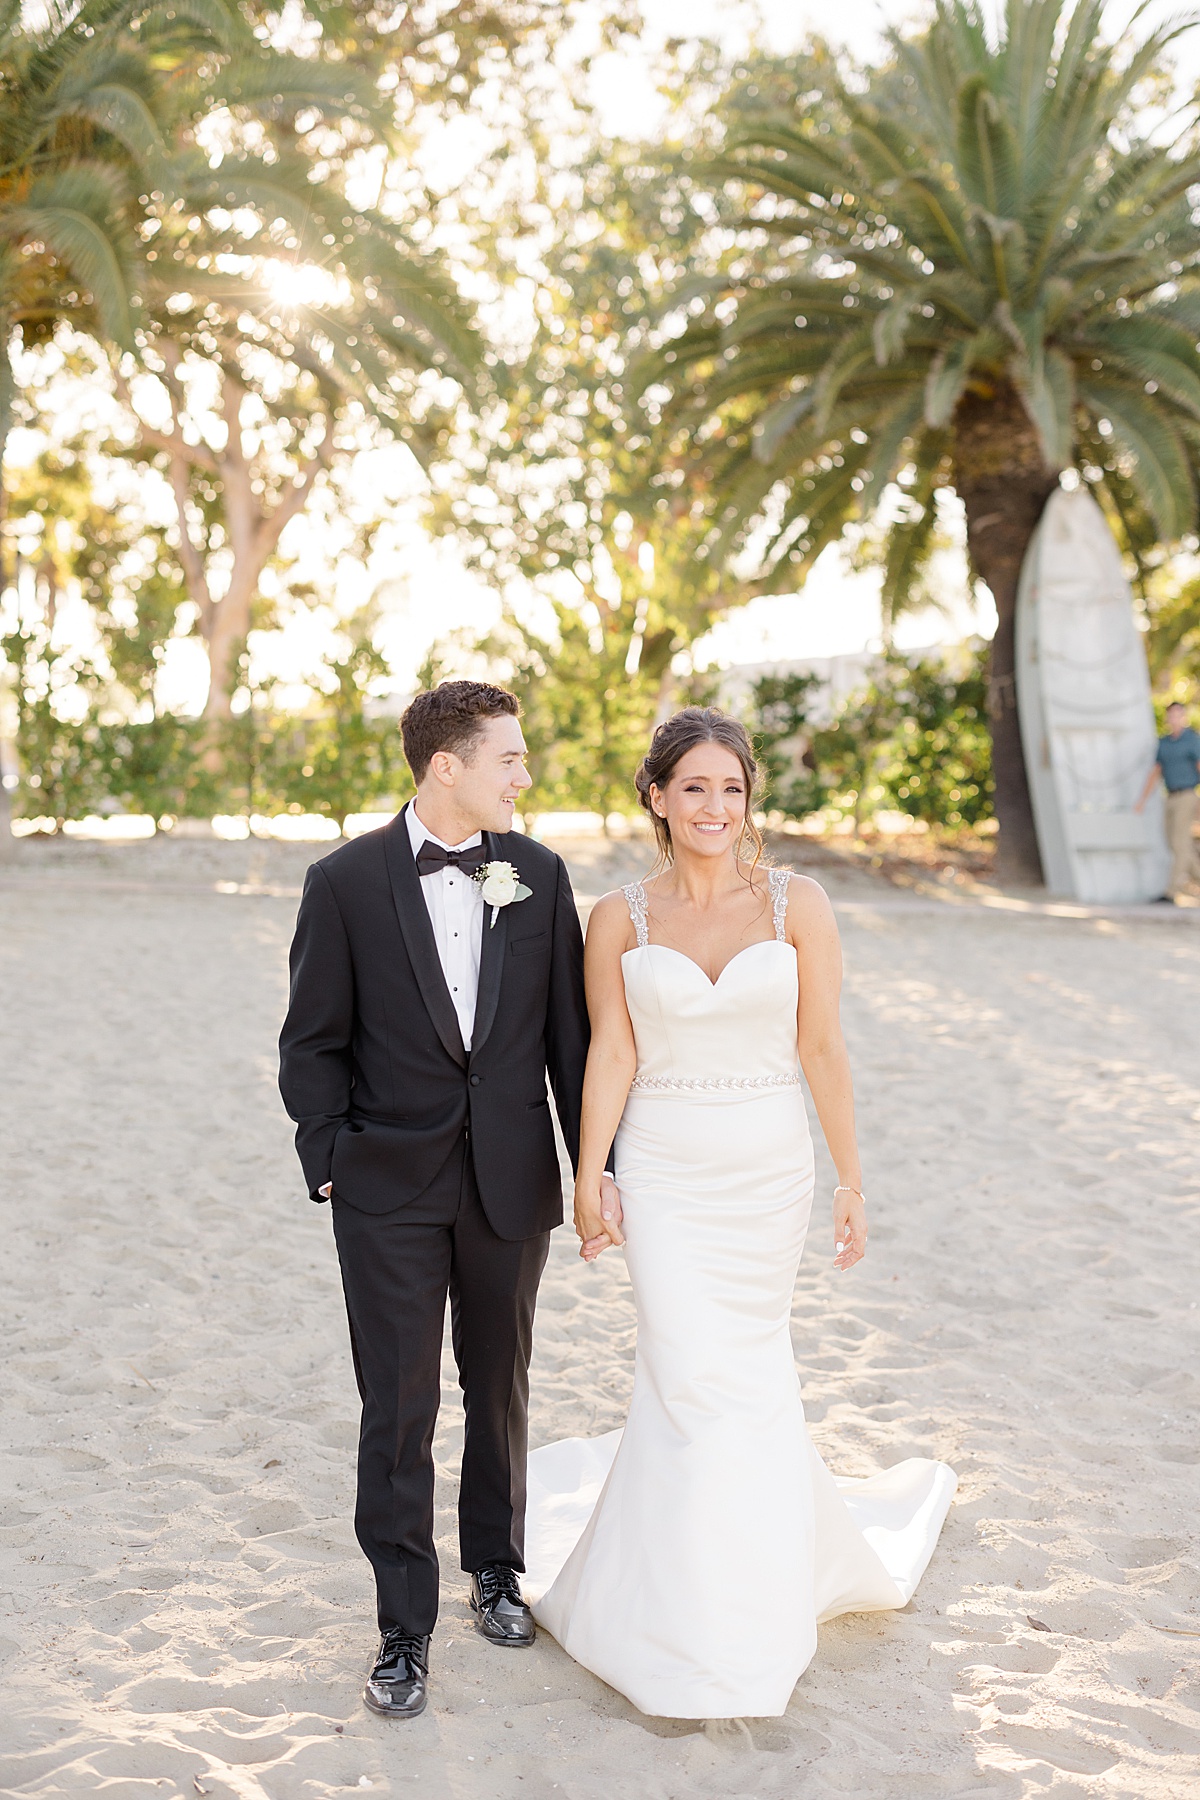 classy bride and groom pose on beach with palm trees after ceremony shot by Destination wedding photographer